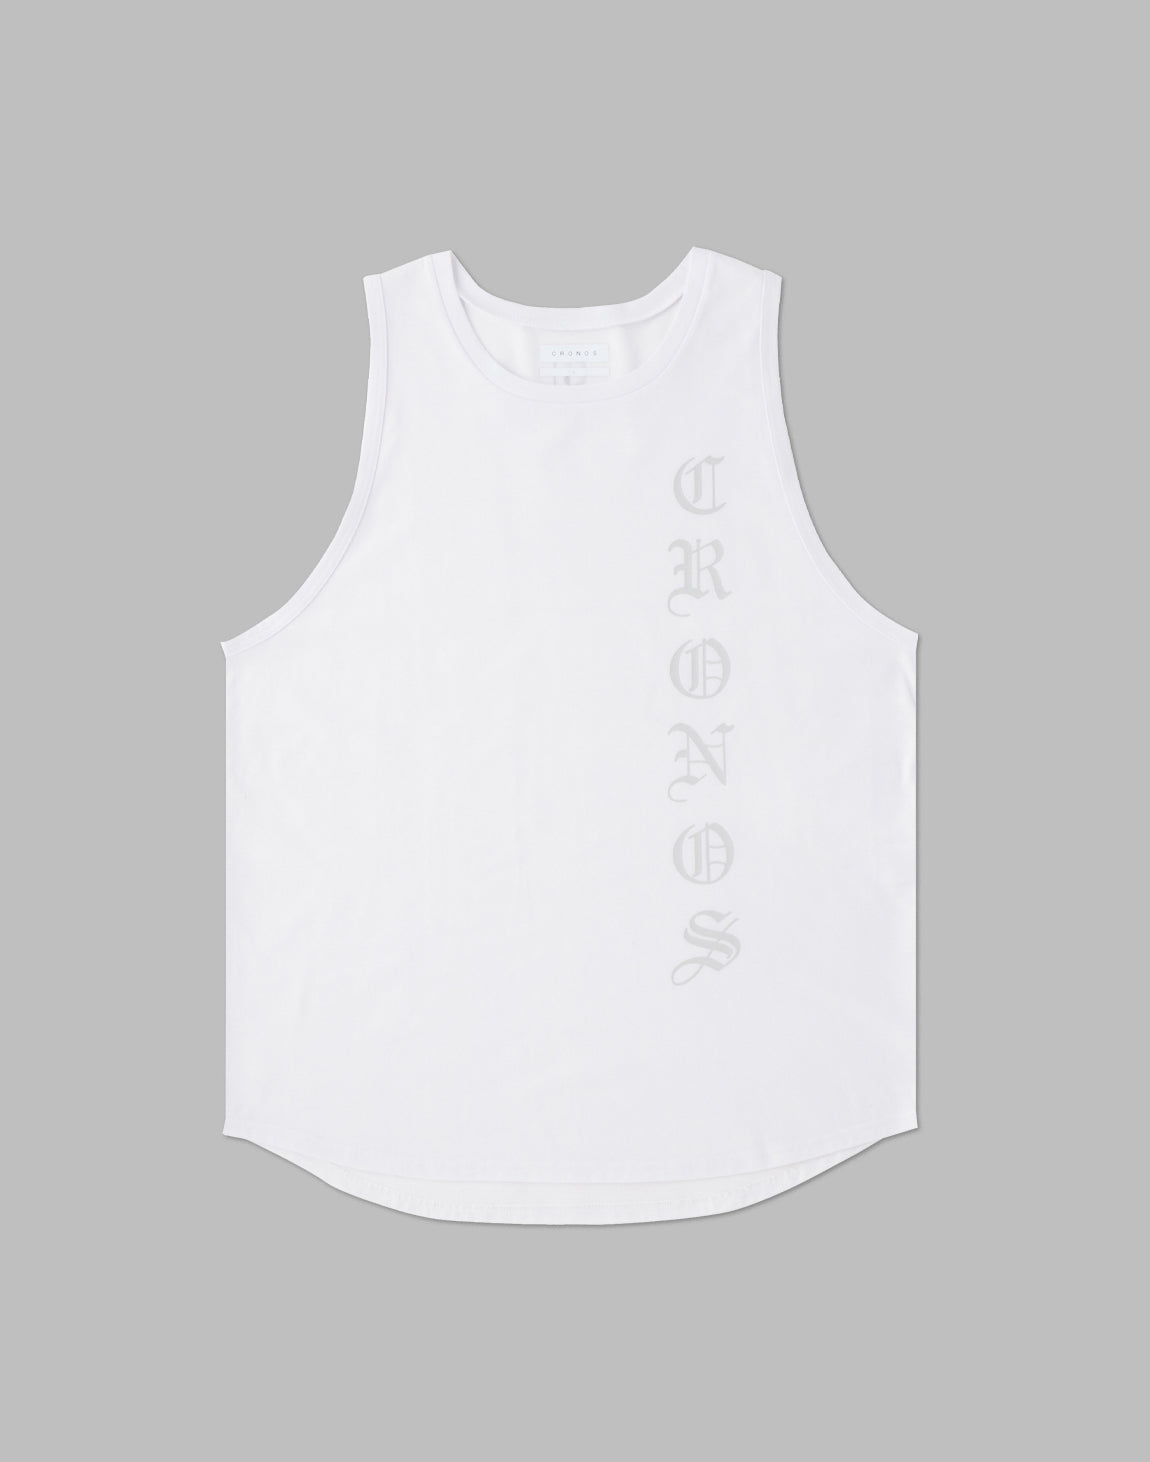 CRONOS BLACK LETTER SLEEVELESS – クロノス CRONOS Official Store